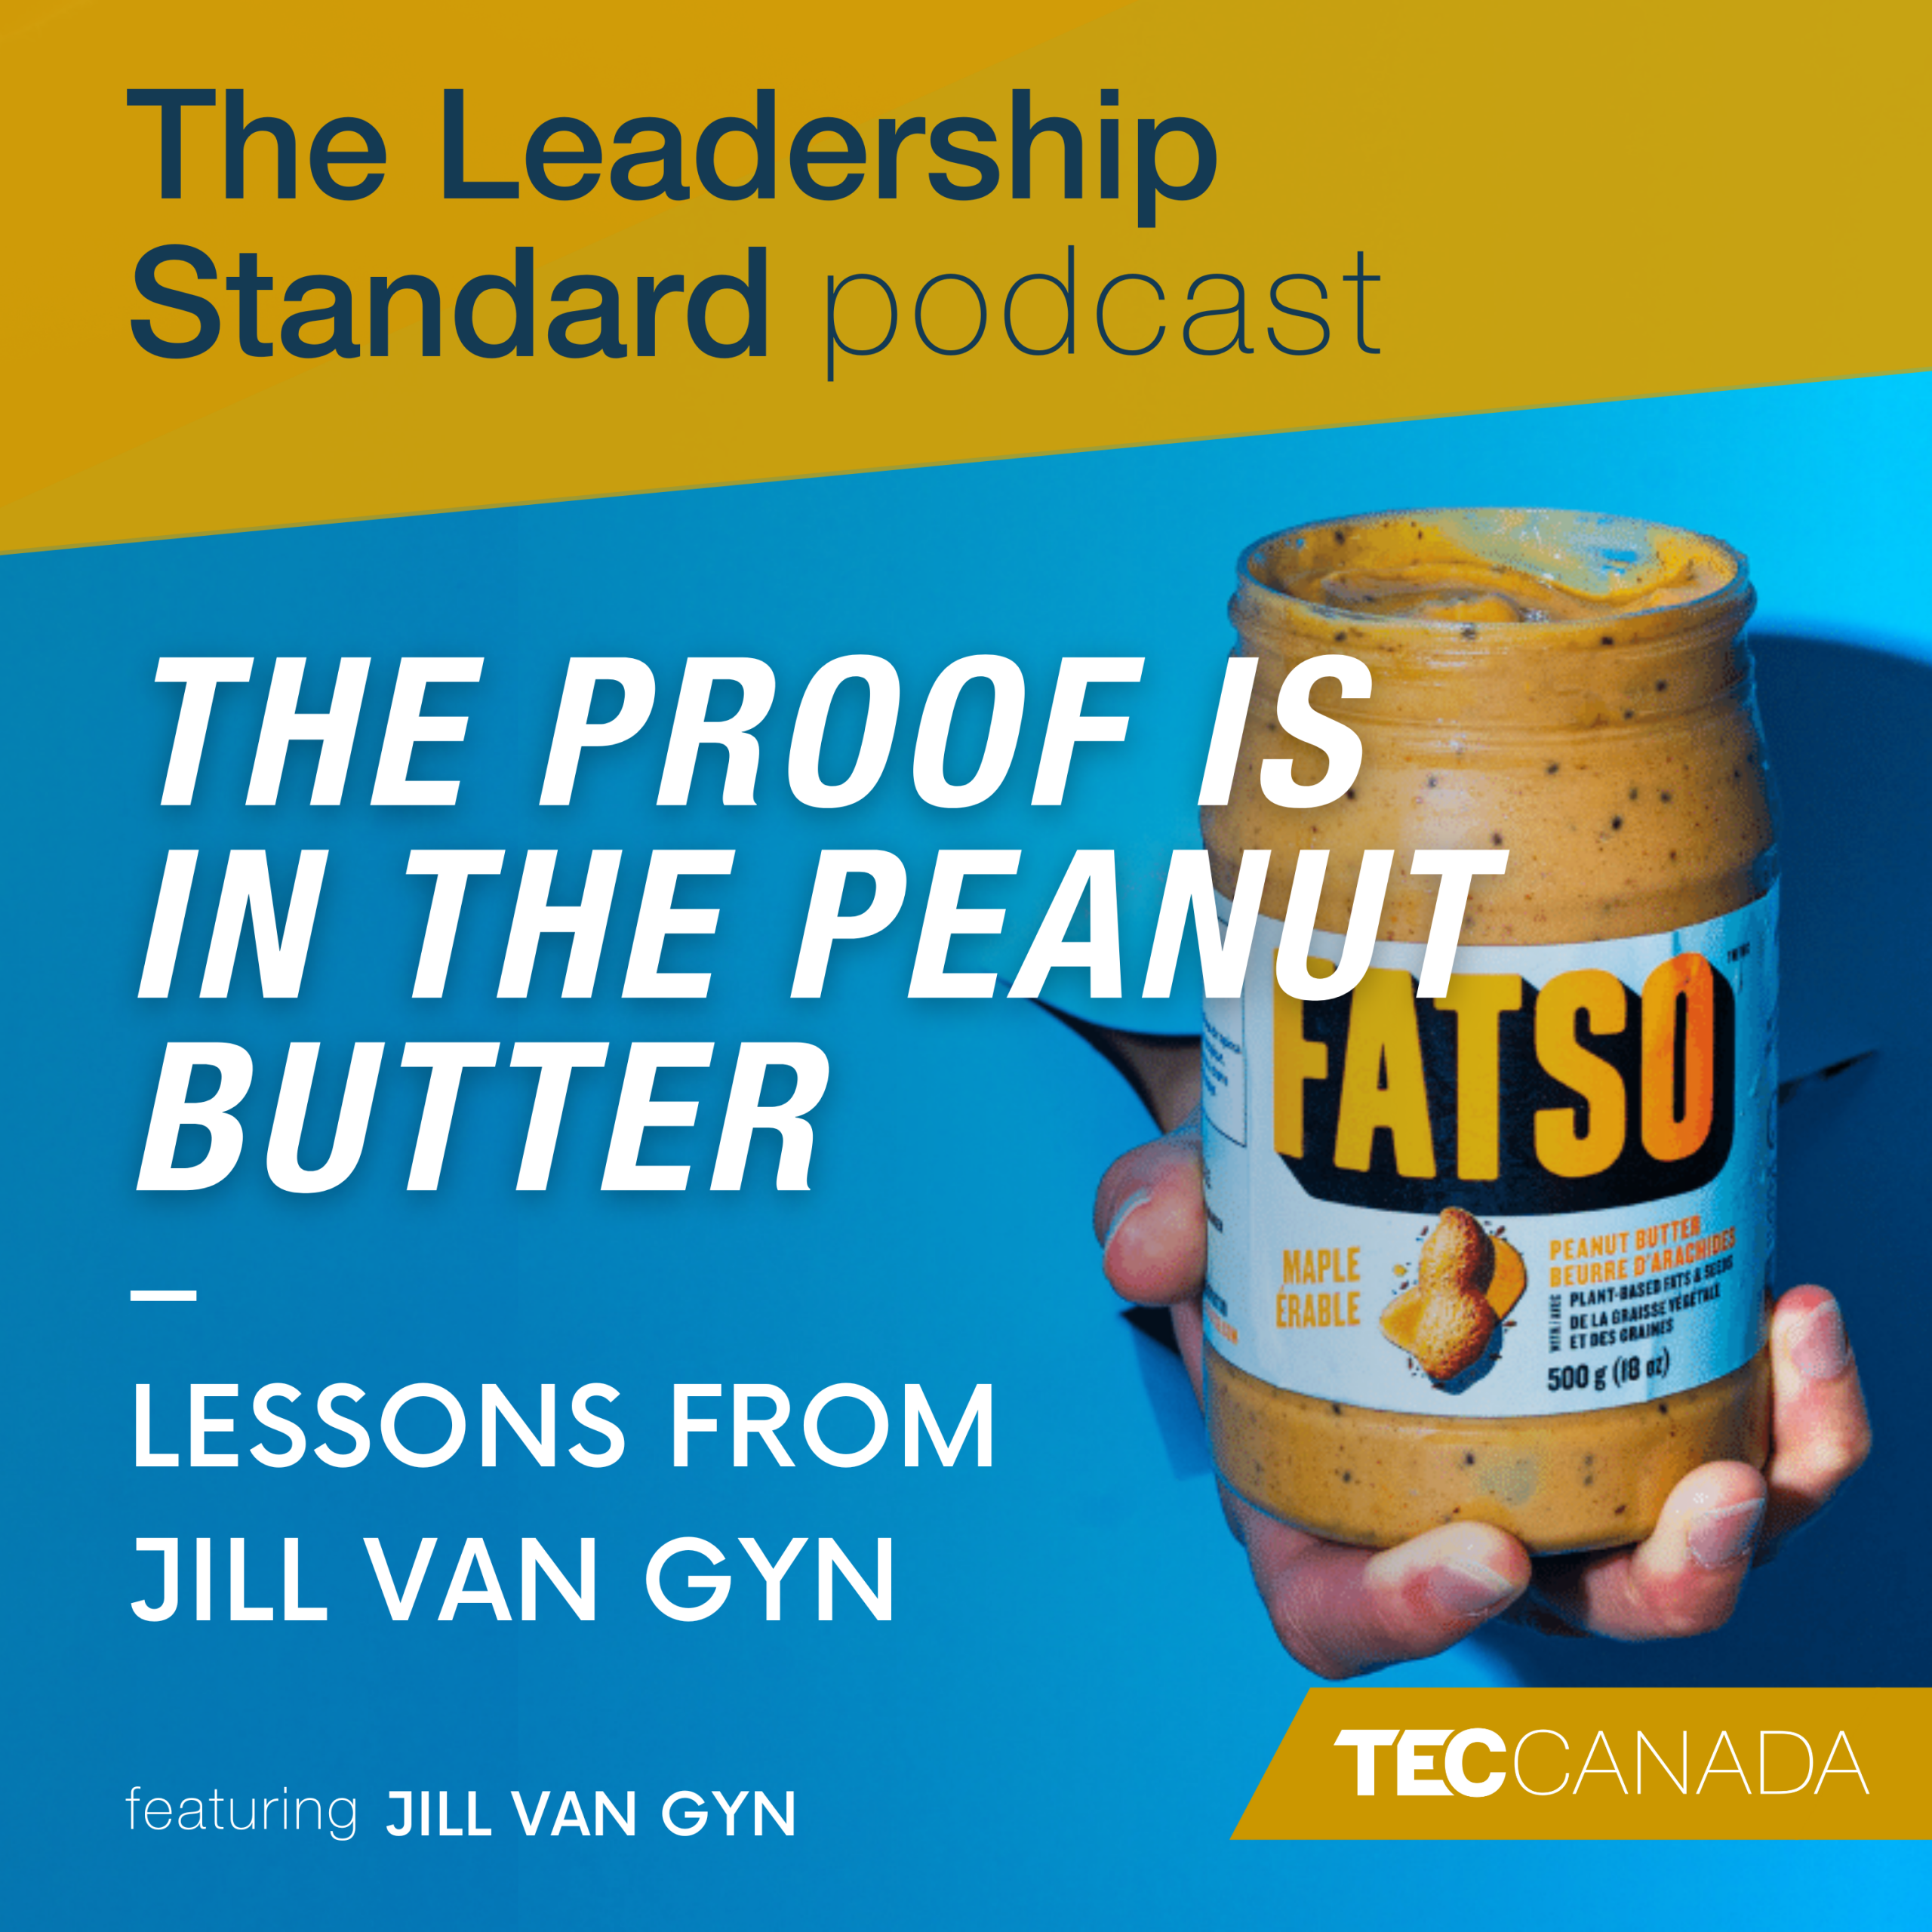 Background image is a jar of a hand holding a jar of Fatso peanut butter and the title reads: The Leadership STandard Podcast: The Proof is in the Peanut Butter. Lessons from Jill Van Gyn.